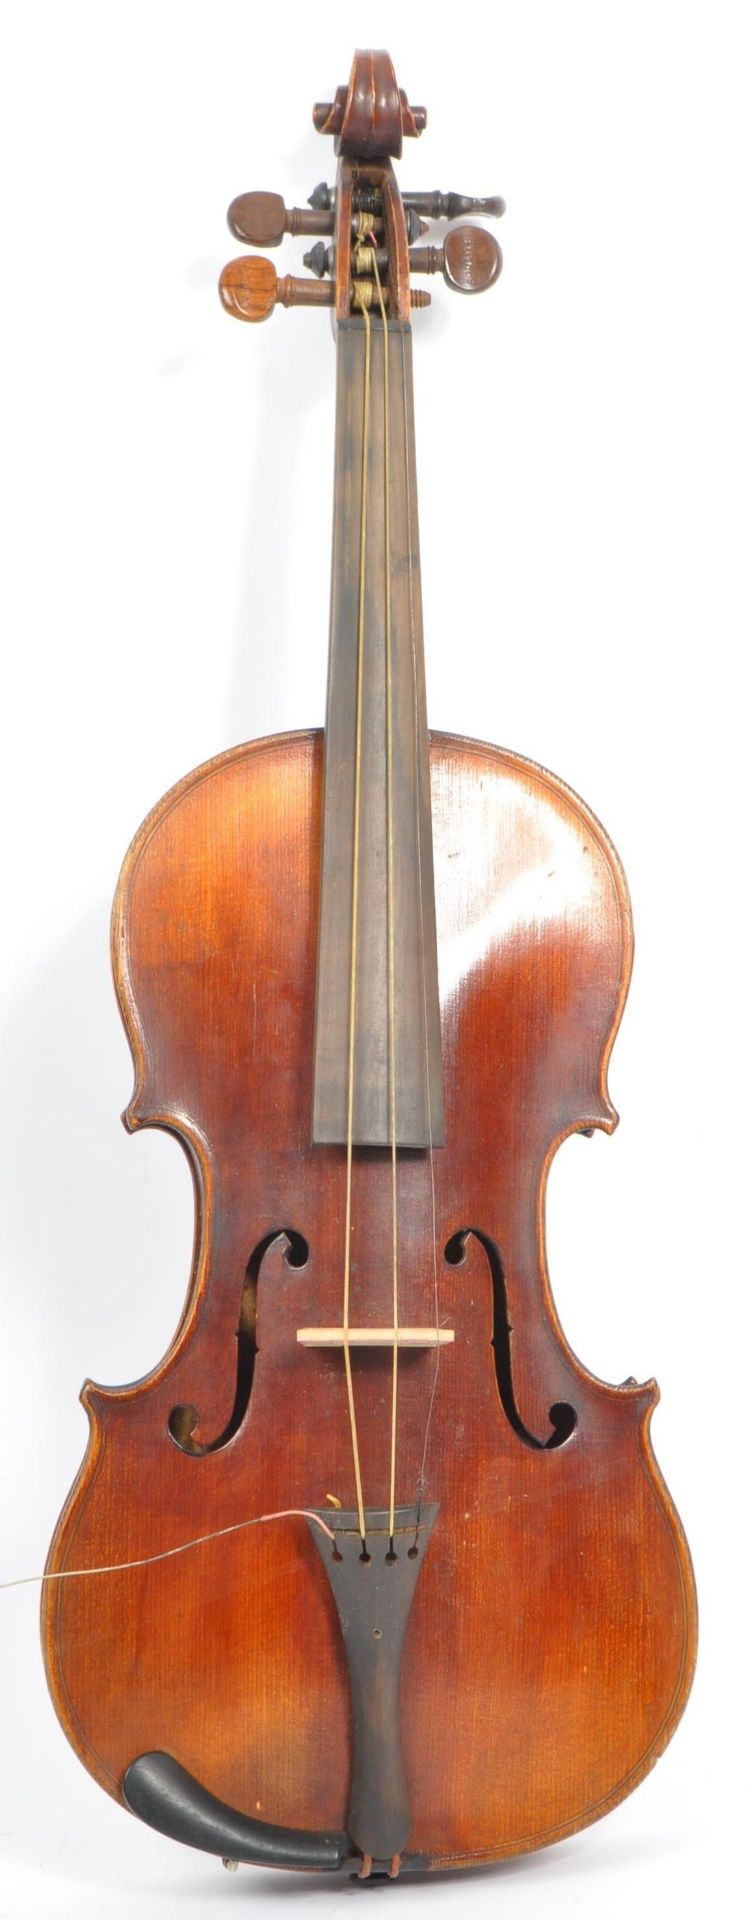 20TH CENTURY FULL SIZE VIOLIN WITH TWO PIECE BACK - Image 2 of 10